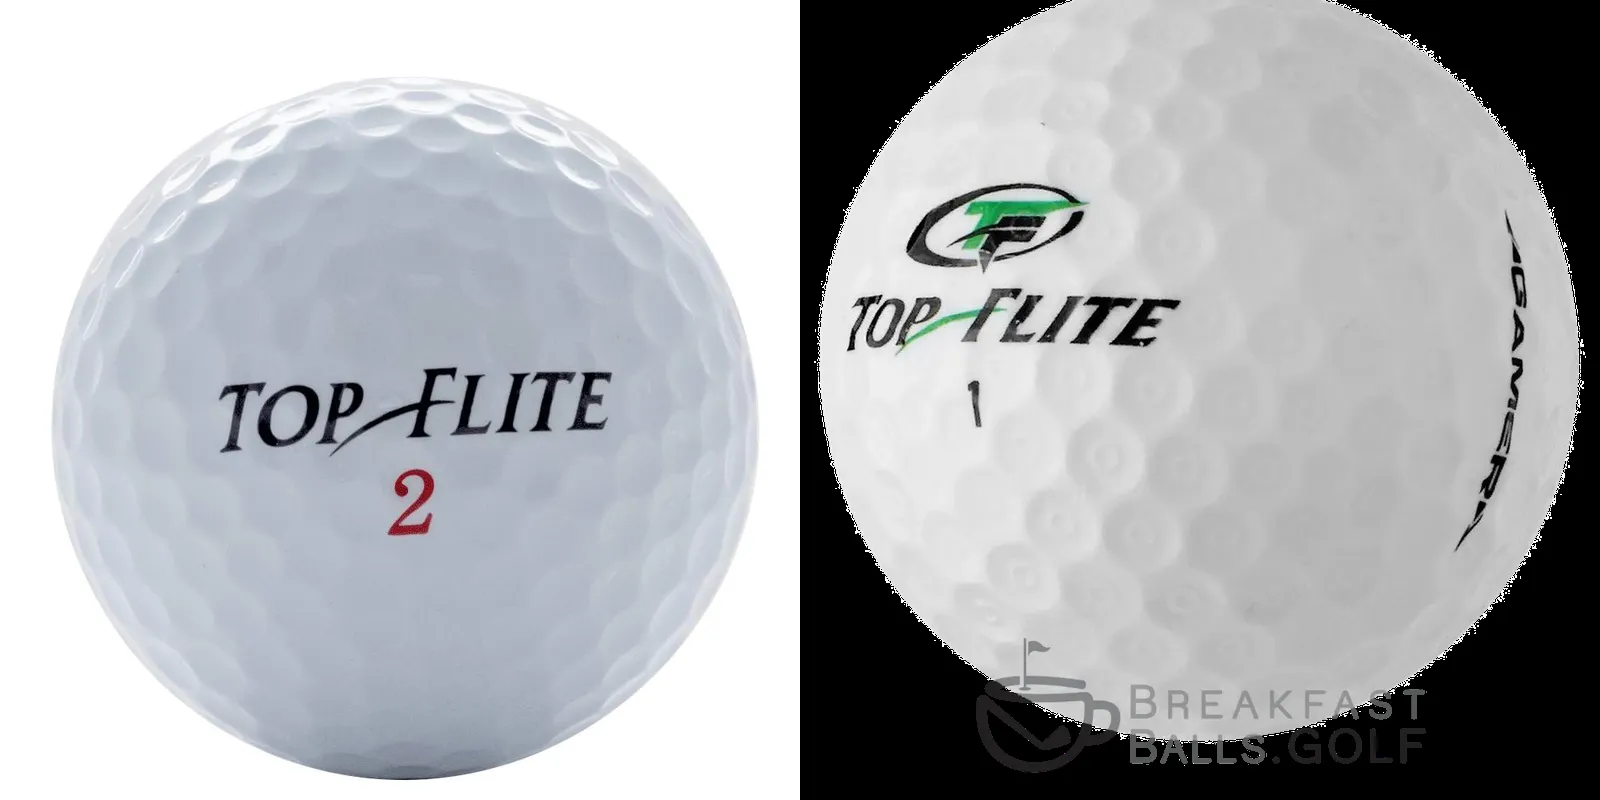 The introduction of Top Flite Golf Ball